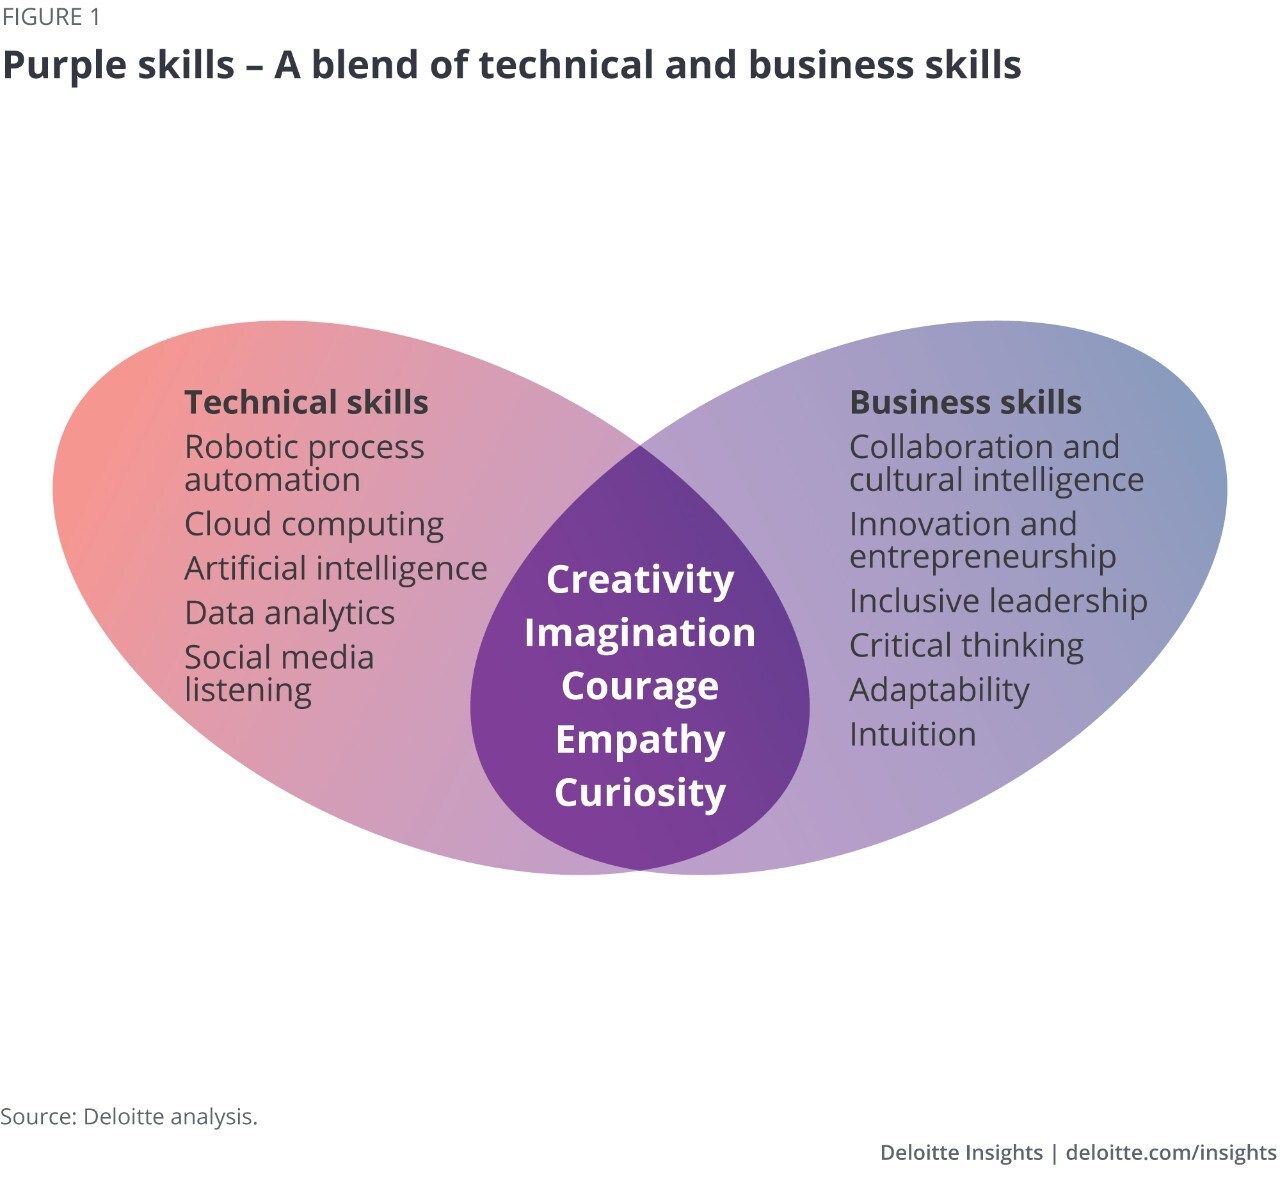 Figure 1. The rising importance of “purple skills” [technical (red) + business (blue)]